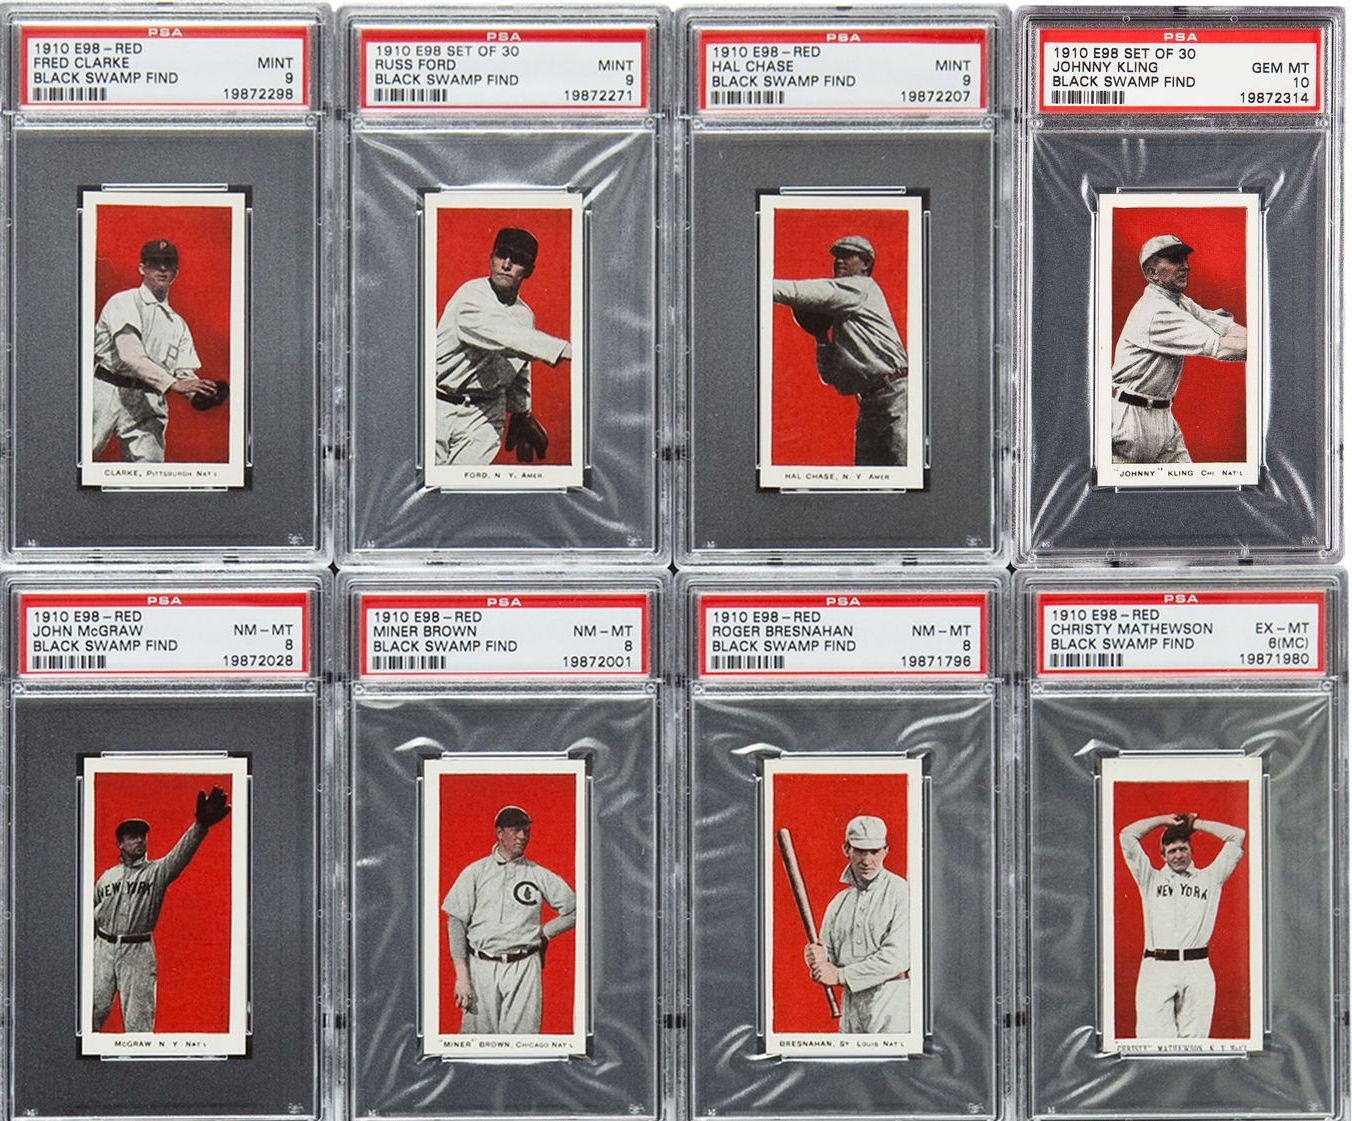 A set of Ty Cobb cards worth more than $1 million was just found